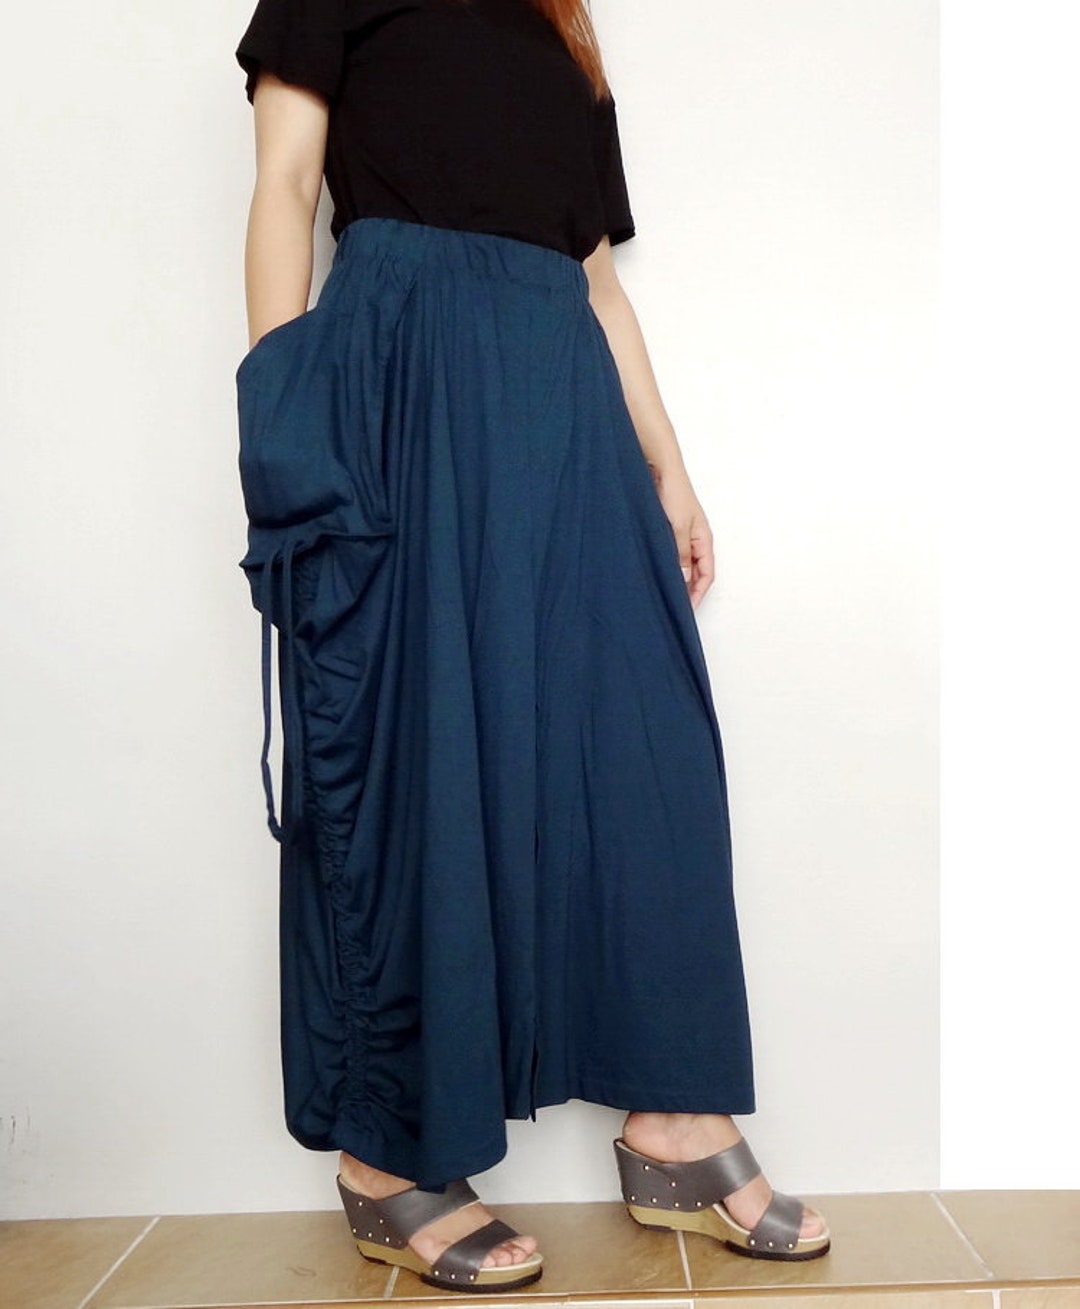 Convertible Long Skirt or Pants Casual Wide Legs in Cotton - Etsy